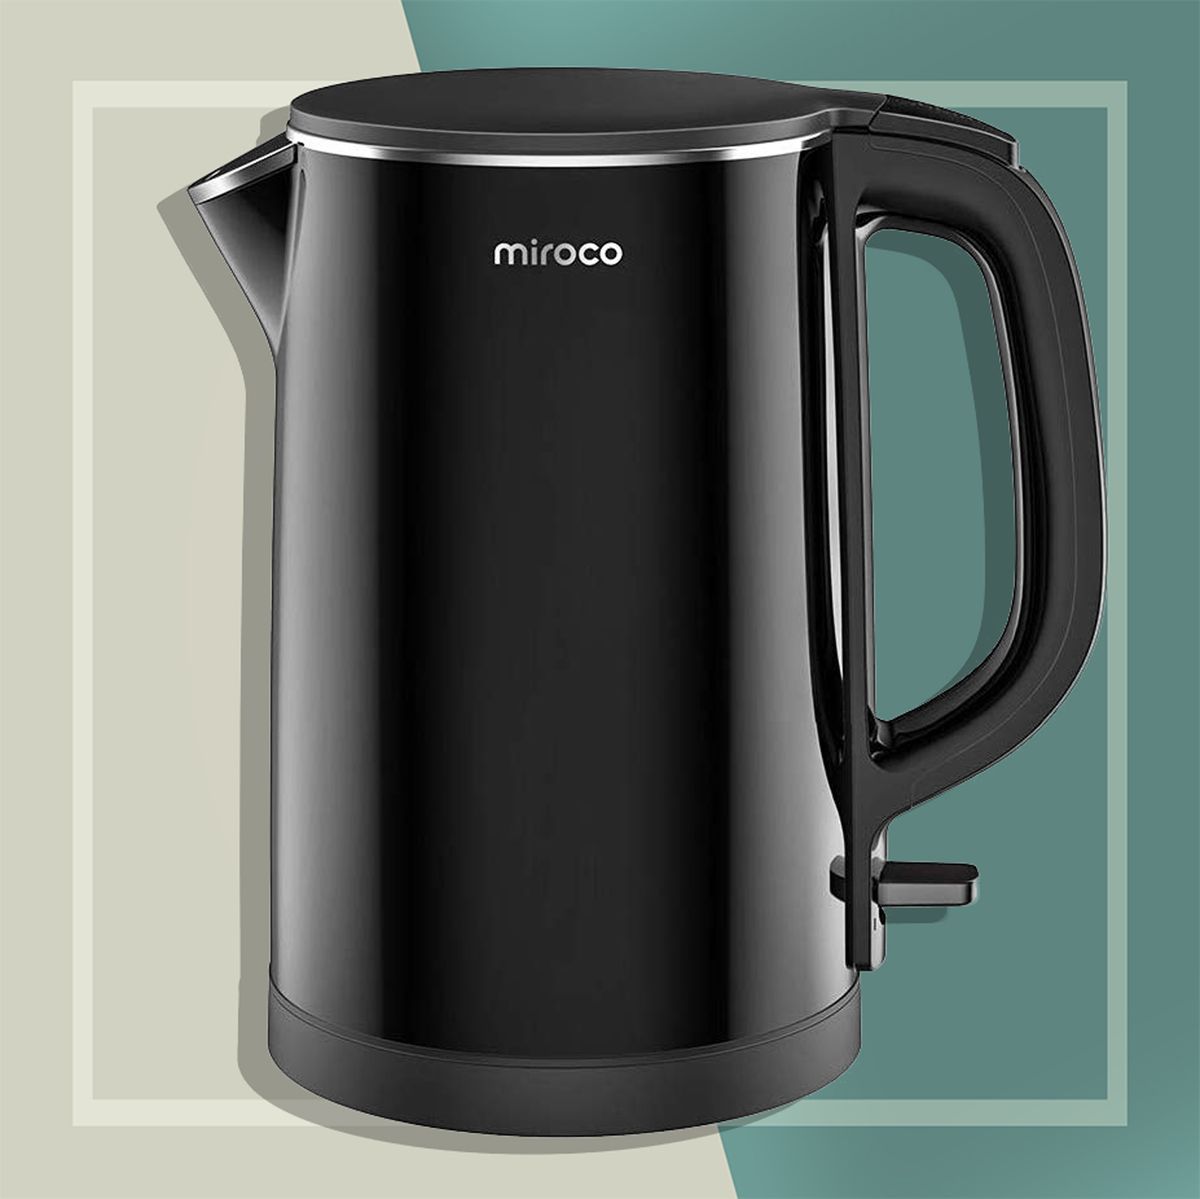 Miroco 1.5L Double Wall Electric Kettle